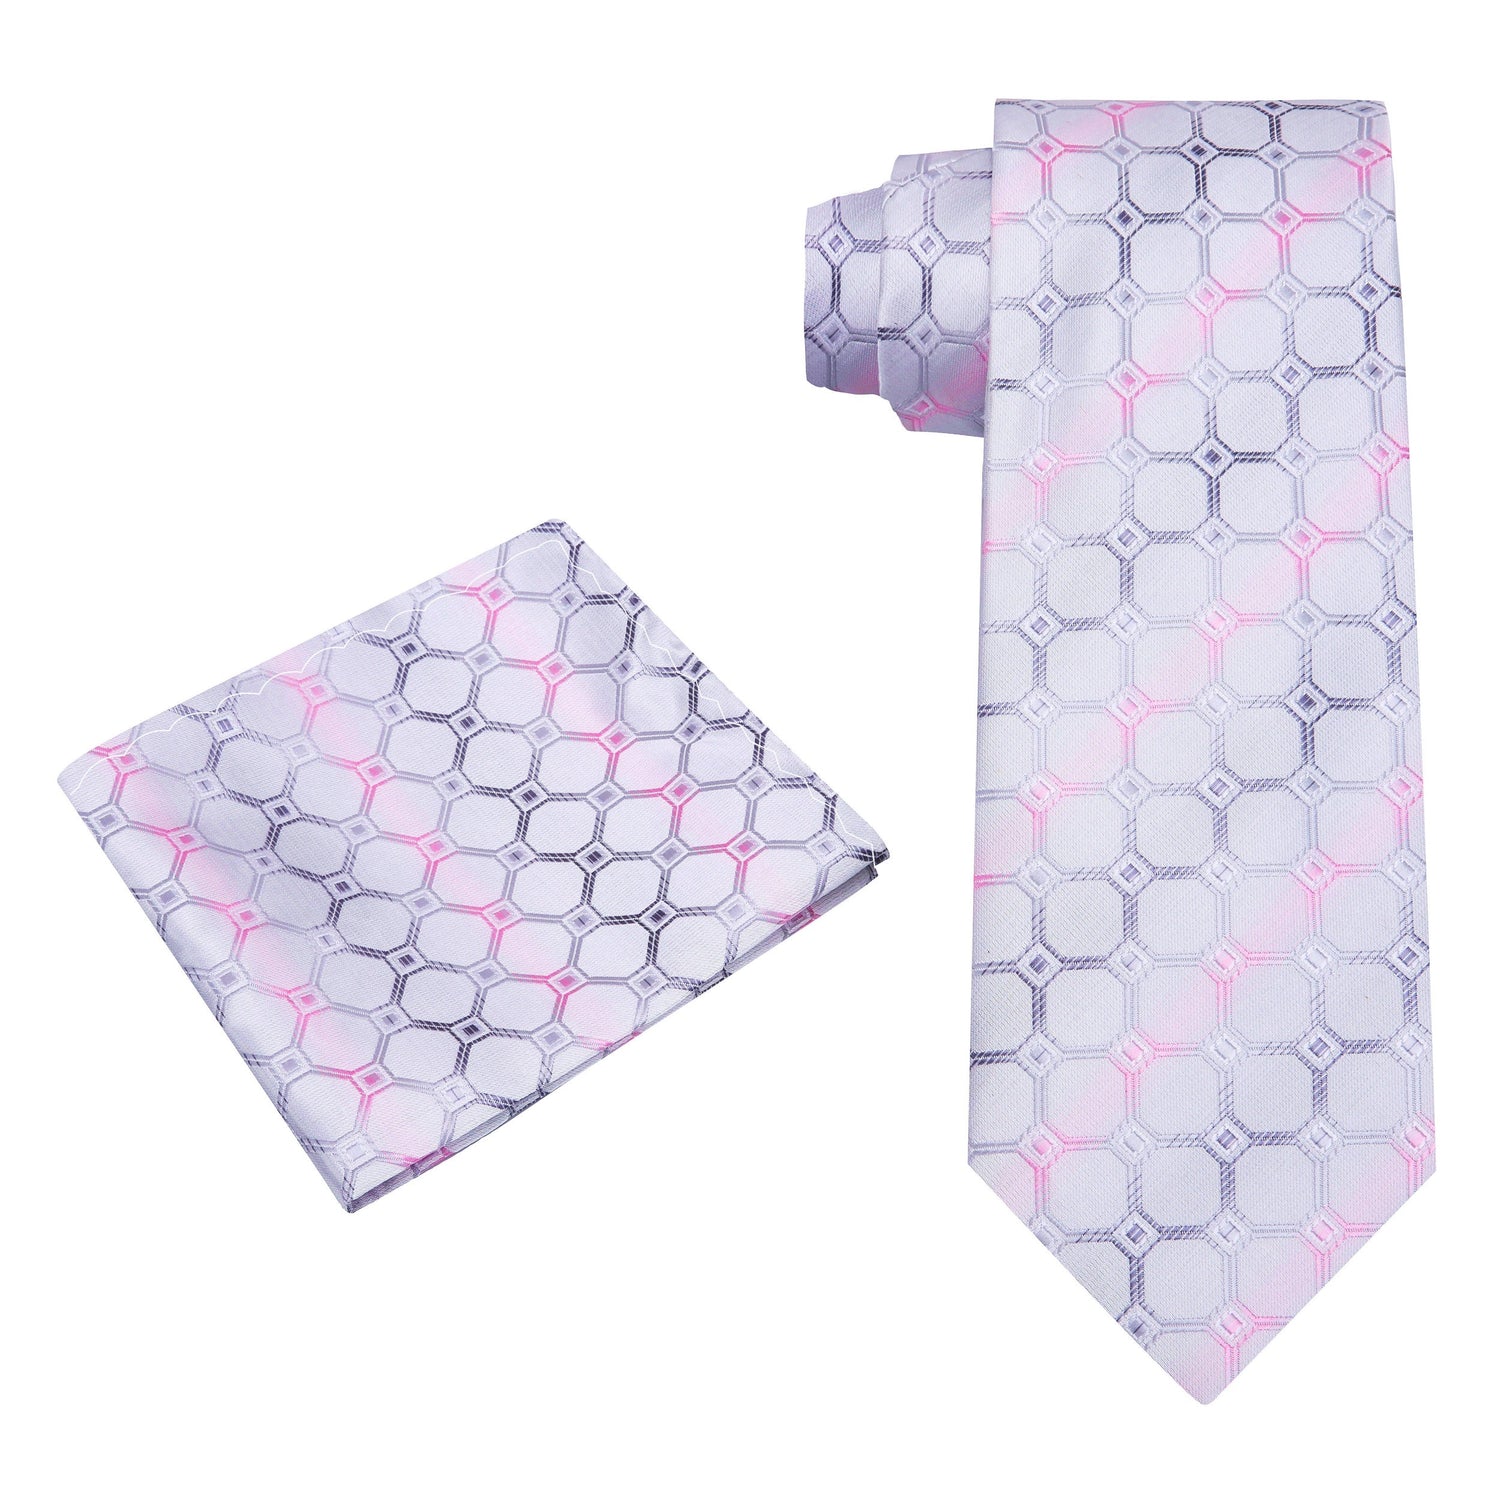 An Icy Silver, Pink, White, Black Geometric Squares With Small Diamonds Pattern Silk Necktie, Matching Pocket Square